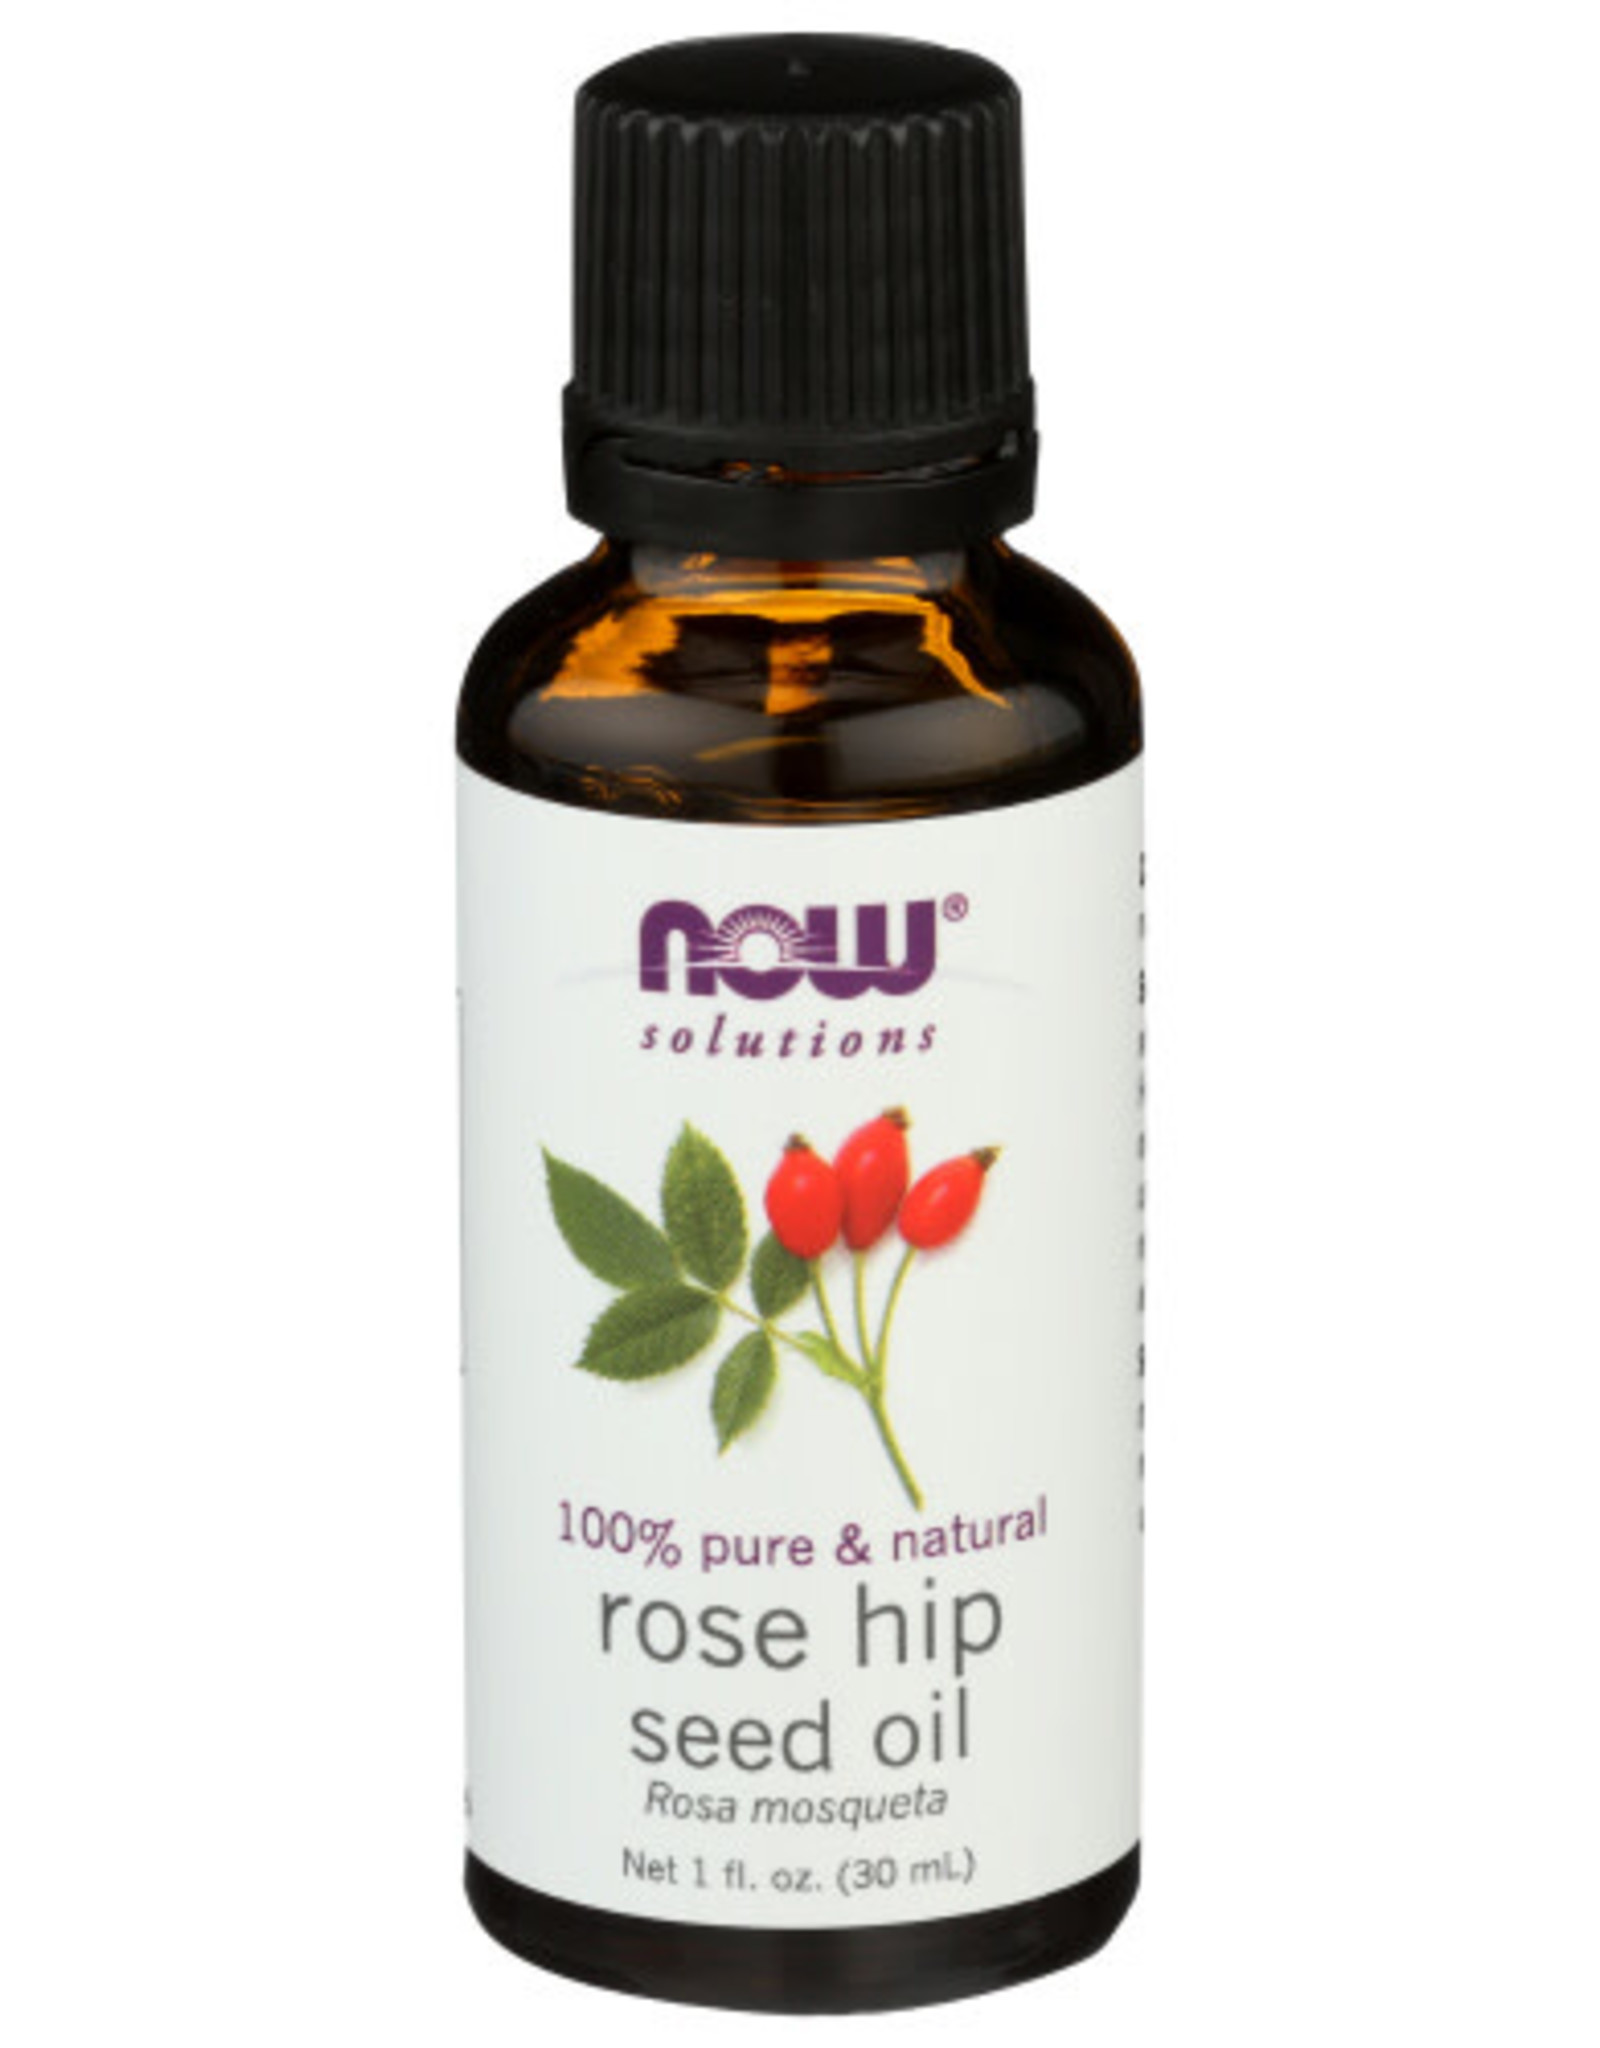 NOW® NOW PURE ROSE HIP SEED OIL, 1 FL. OZ.